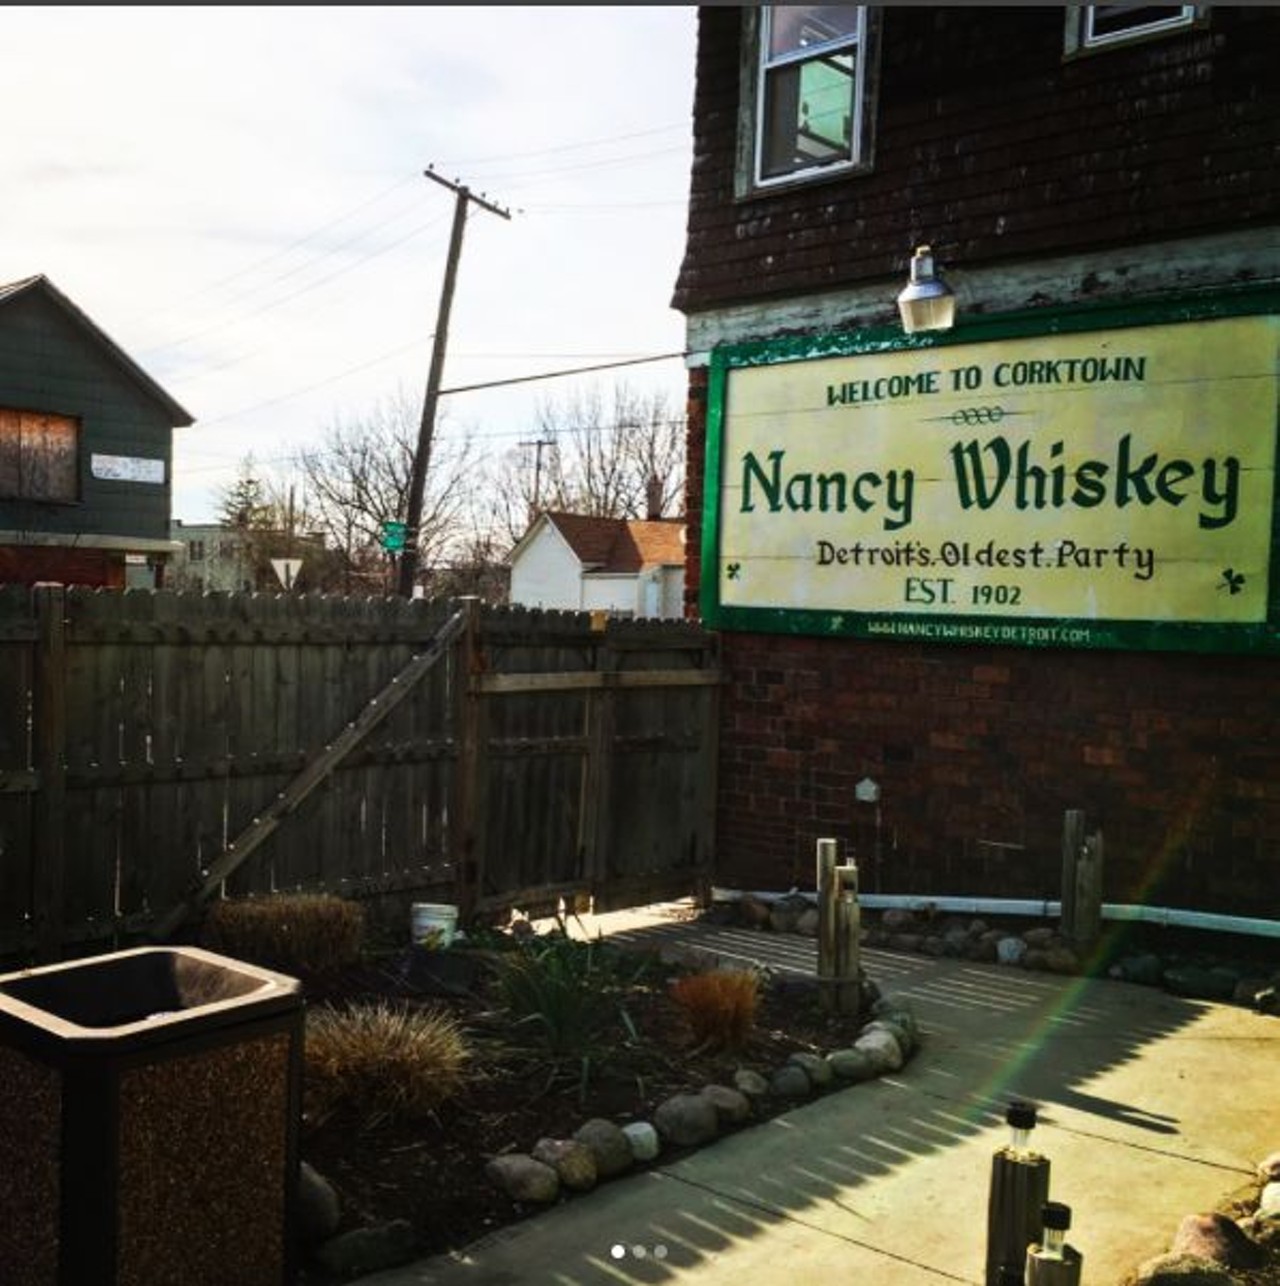 Nancy Whiskey  
2644 Harrison St., Detroit
Grab a pint at the oldest party in Detroit. This 110-year-old Irish pub is in the center of Corktown and a great place to stop before any sporting event. With Whiskey Wednesdays and a jukebox that plays all of your favorite old tunes, there is no better party than this.
Photo via @aroundthed